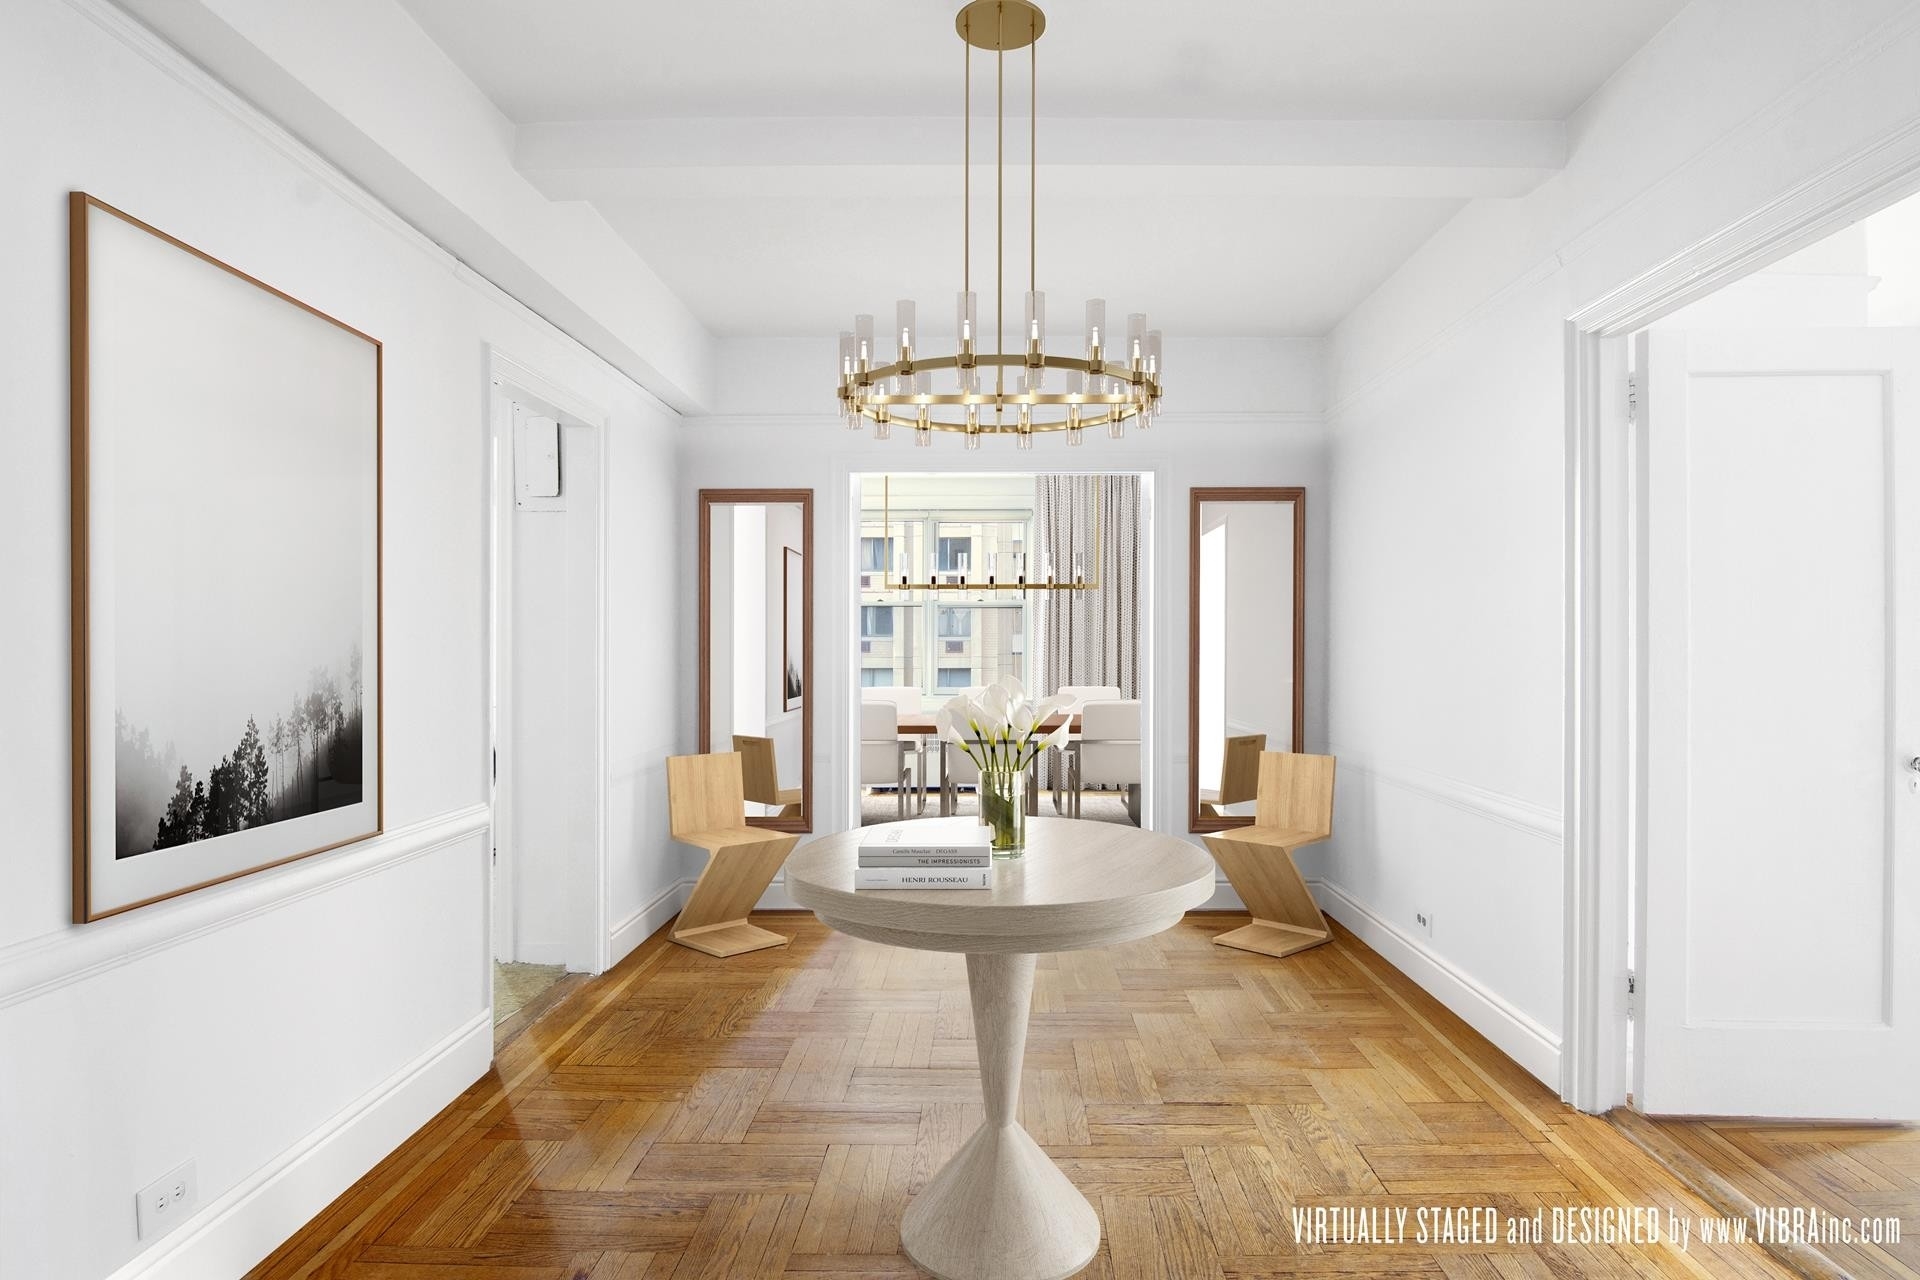 Co-op Properties for Sale at 50 W 96TH ST, 12B Upper West Side, New York, NY 10025